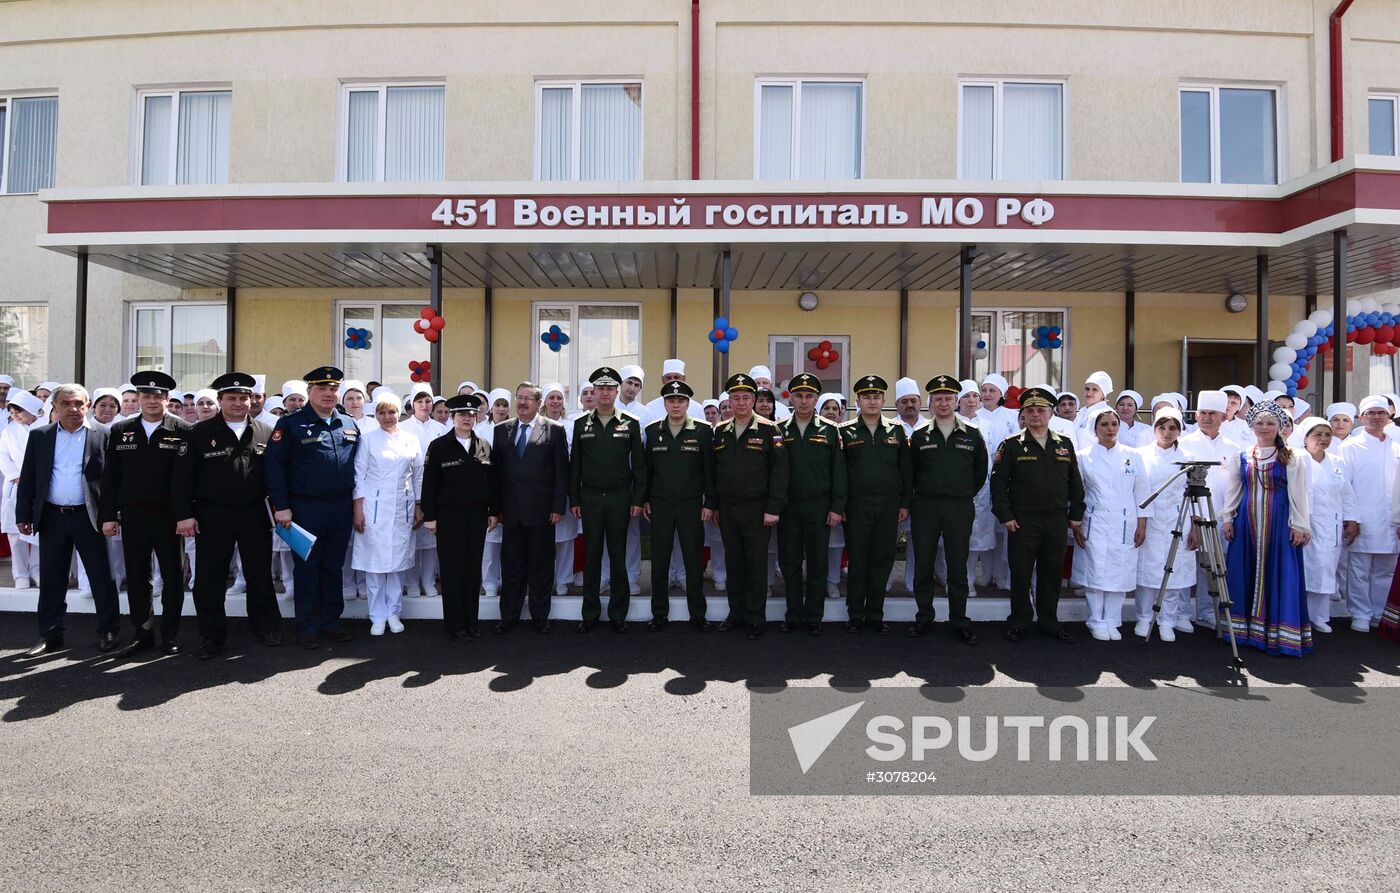 Opening of new hospital building at Russia's military base No. 201 in Tajikistan